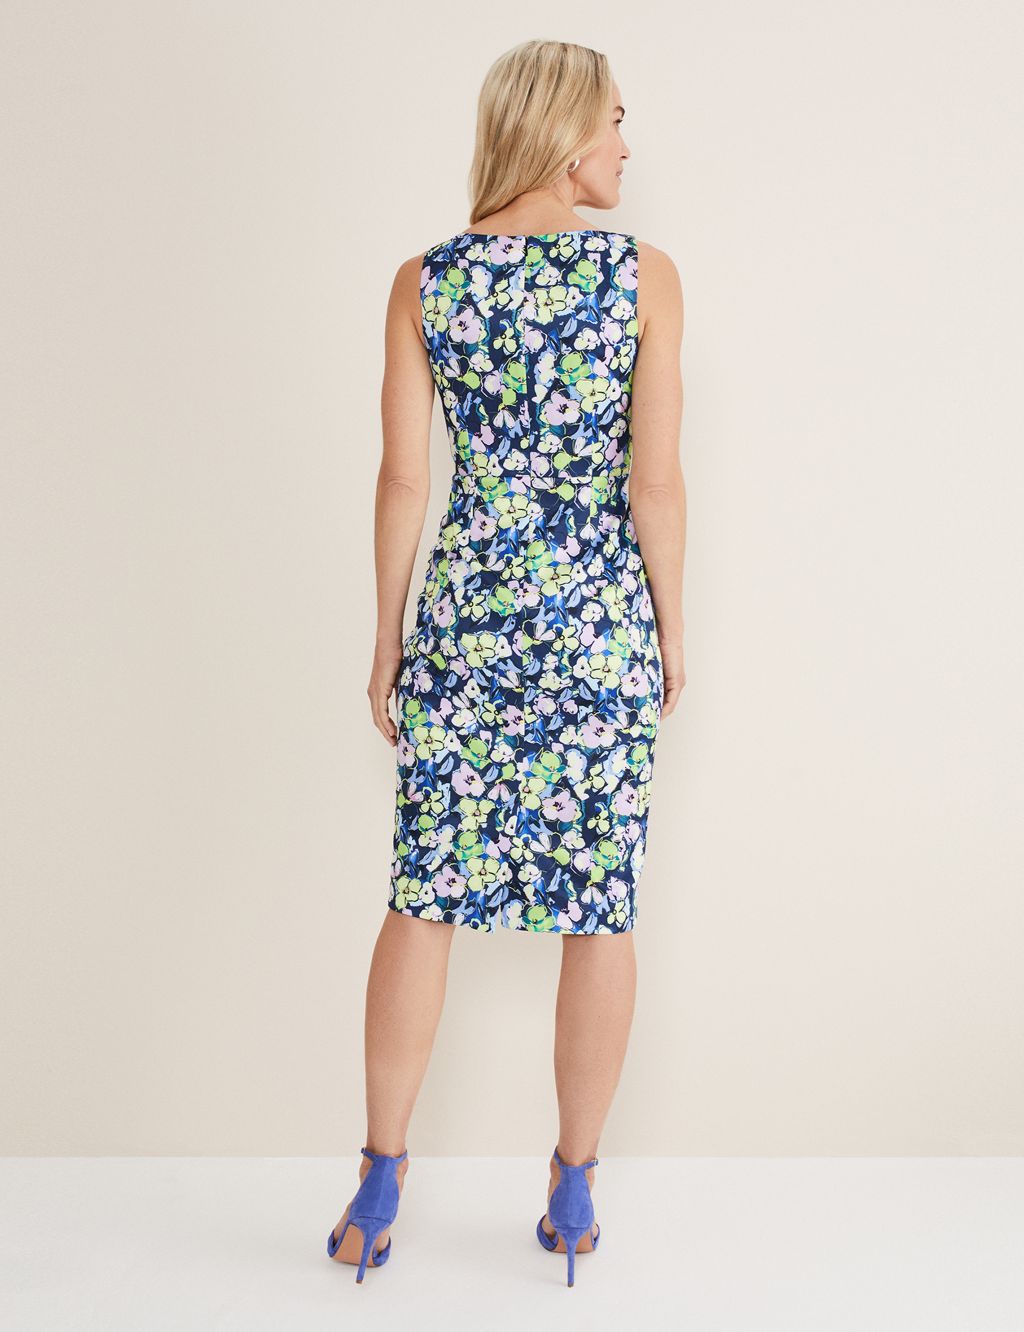 Floral Square Neck Knee Length Bodycon Dress image 6